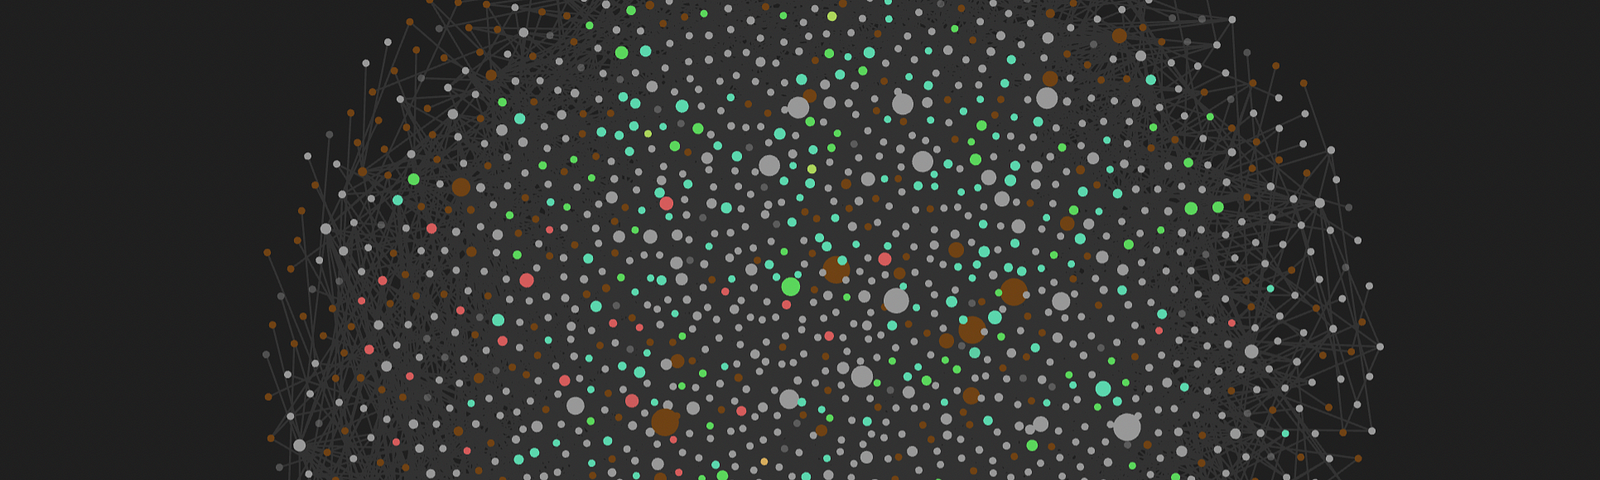 Thousands of colored dots on a black background.